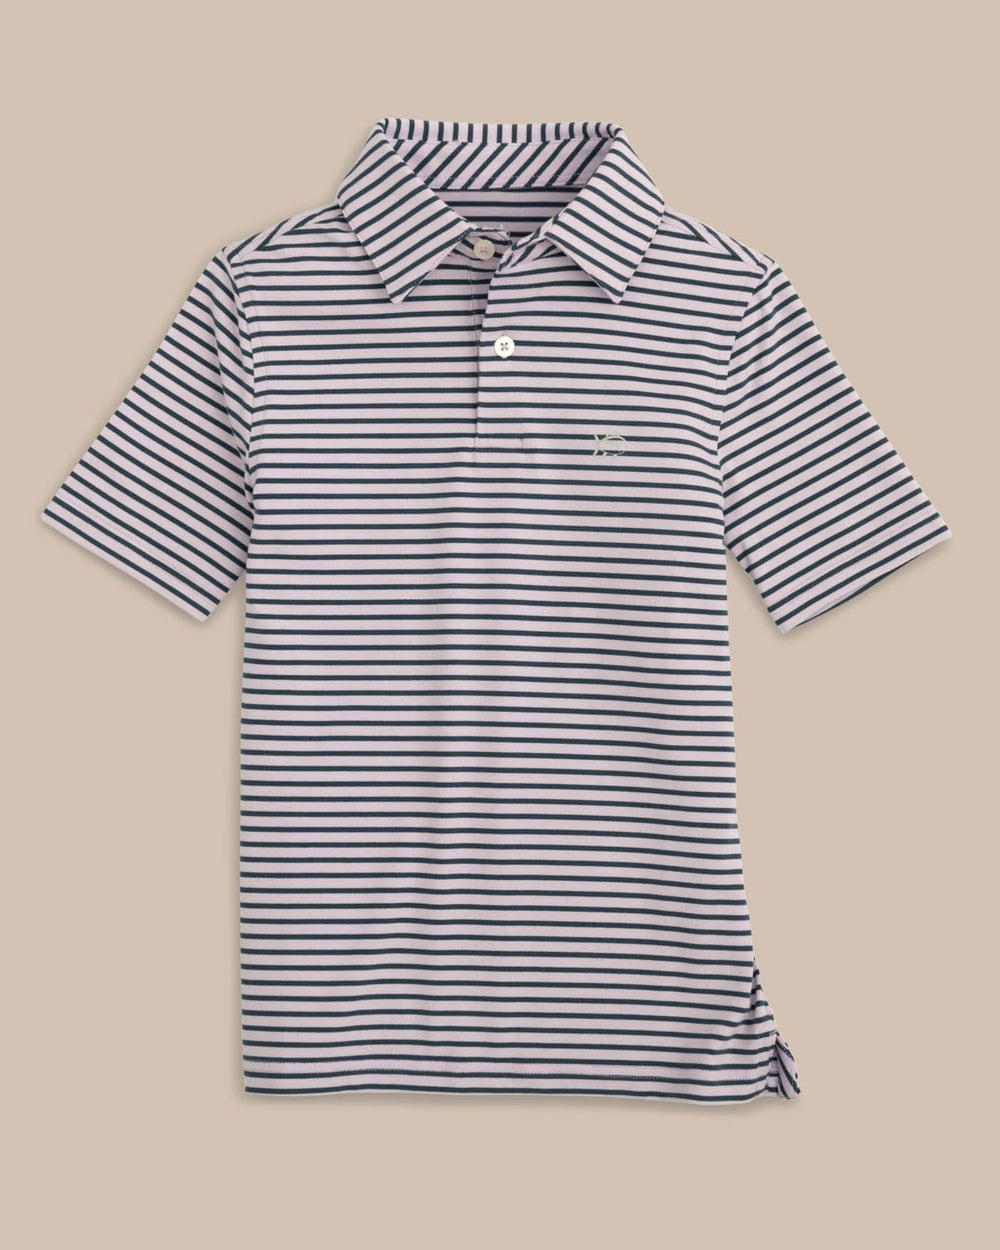 The front view of the Southern Tide Boys Ryder Heather Marin Stripe Performance Polo Shirt by Southern Tide - Heather Orchid Petal